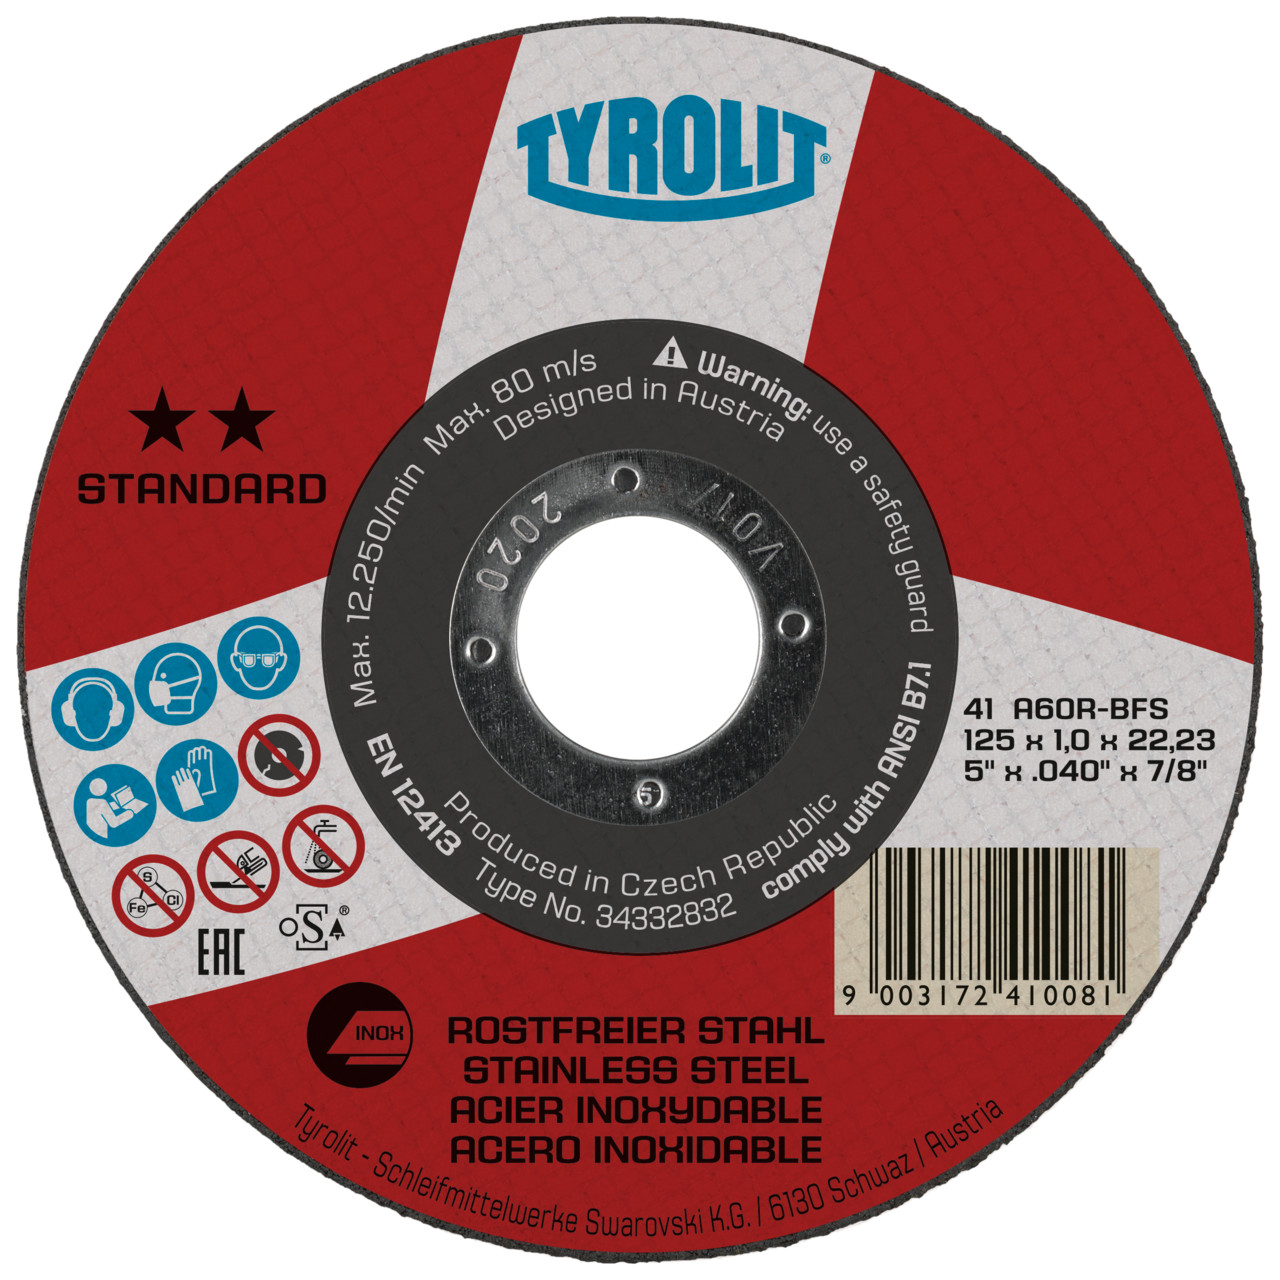 Tyrolit Cutting discs DxDxH 150x2.5x22.23 For stainless steel, shape: 41 - straight version, Art. 367575